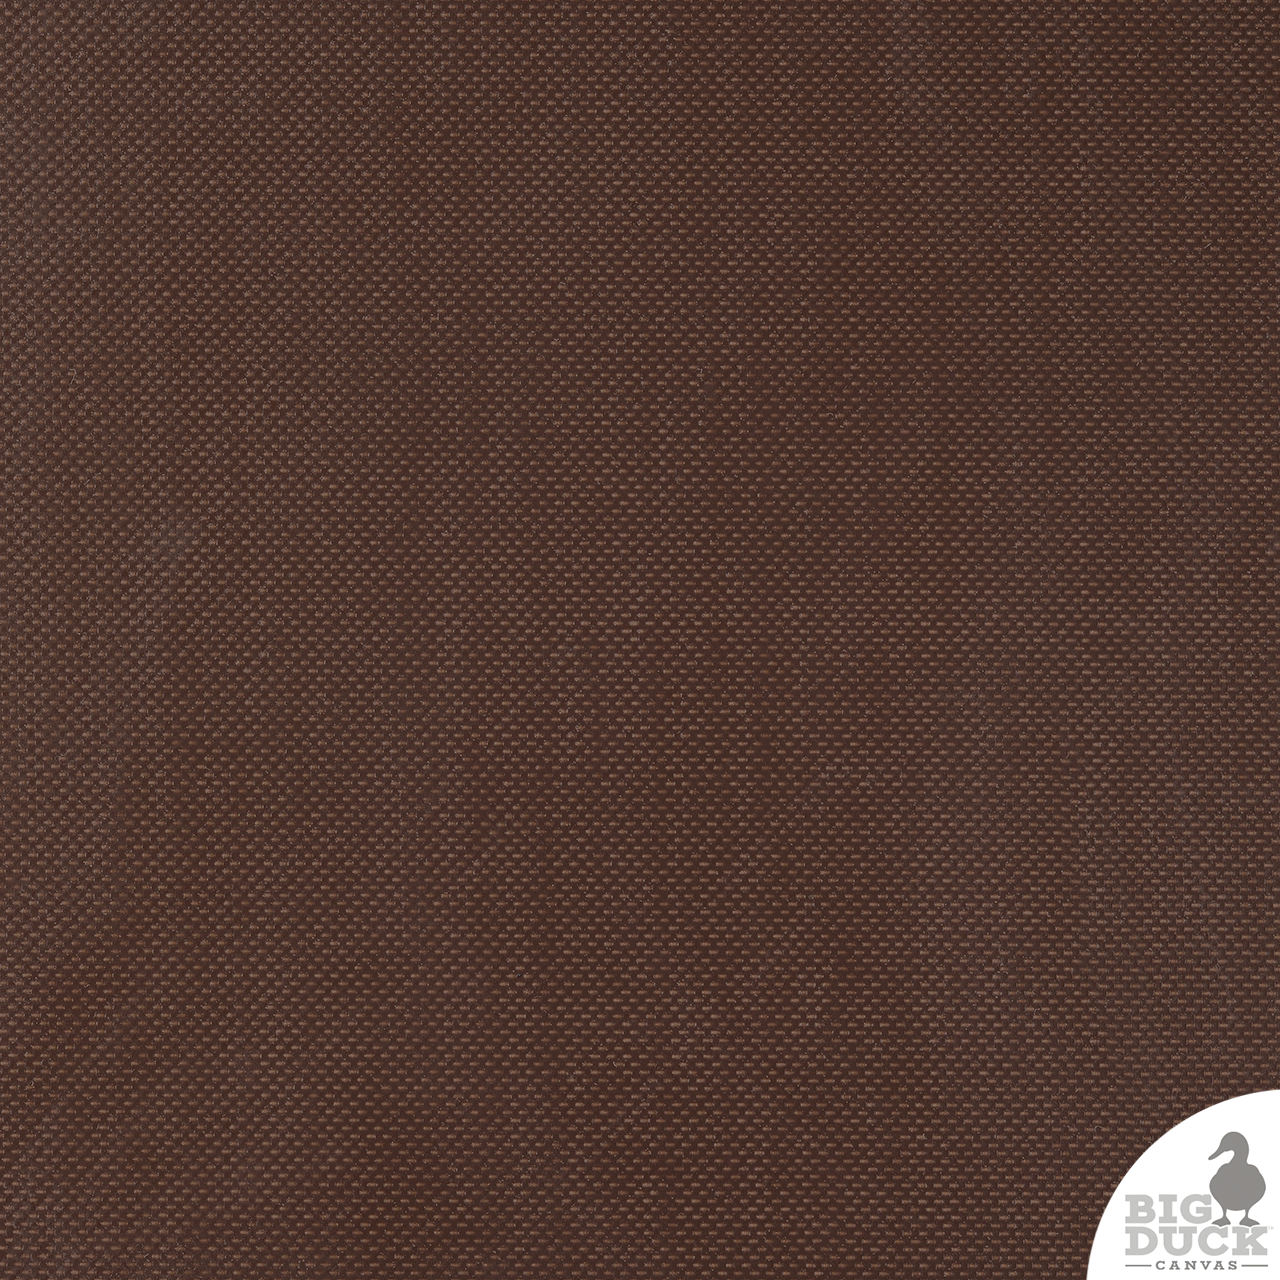 18 oz/61 Industrial Coated Vinyl with Fire Retardant - Cocoa Brown